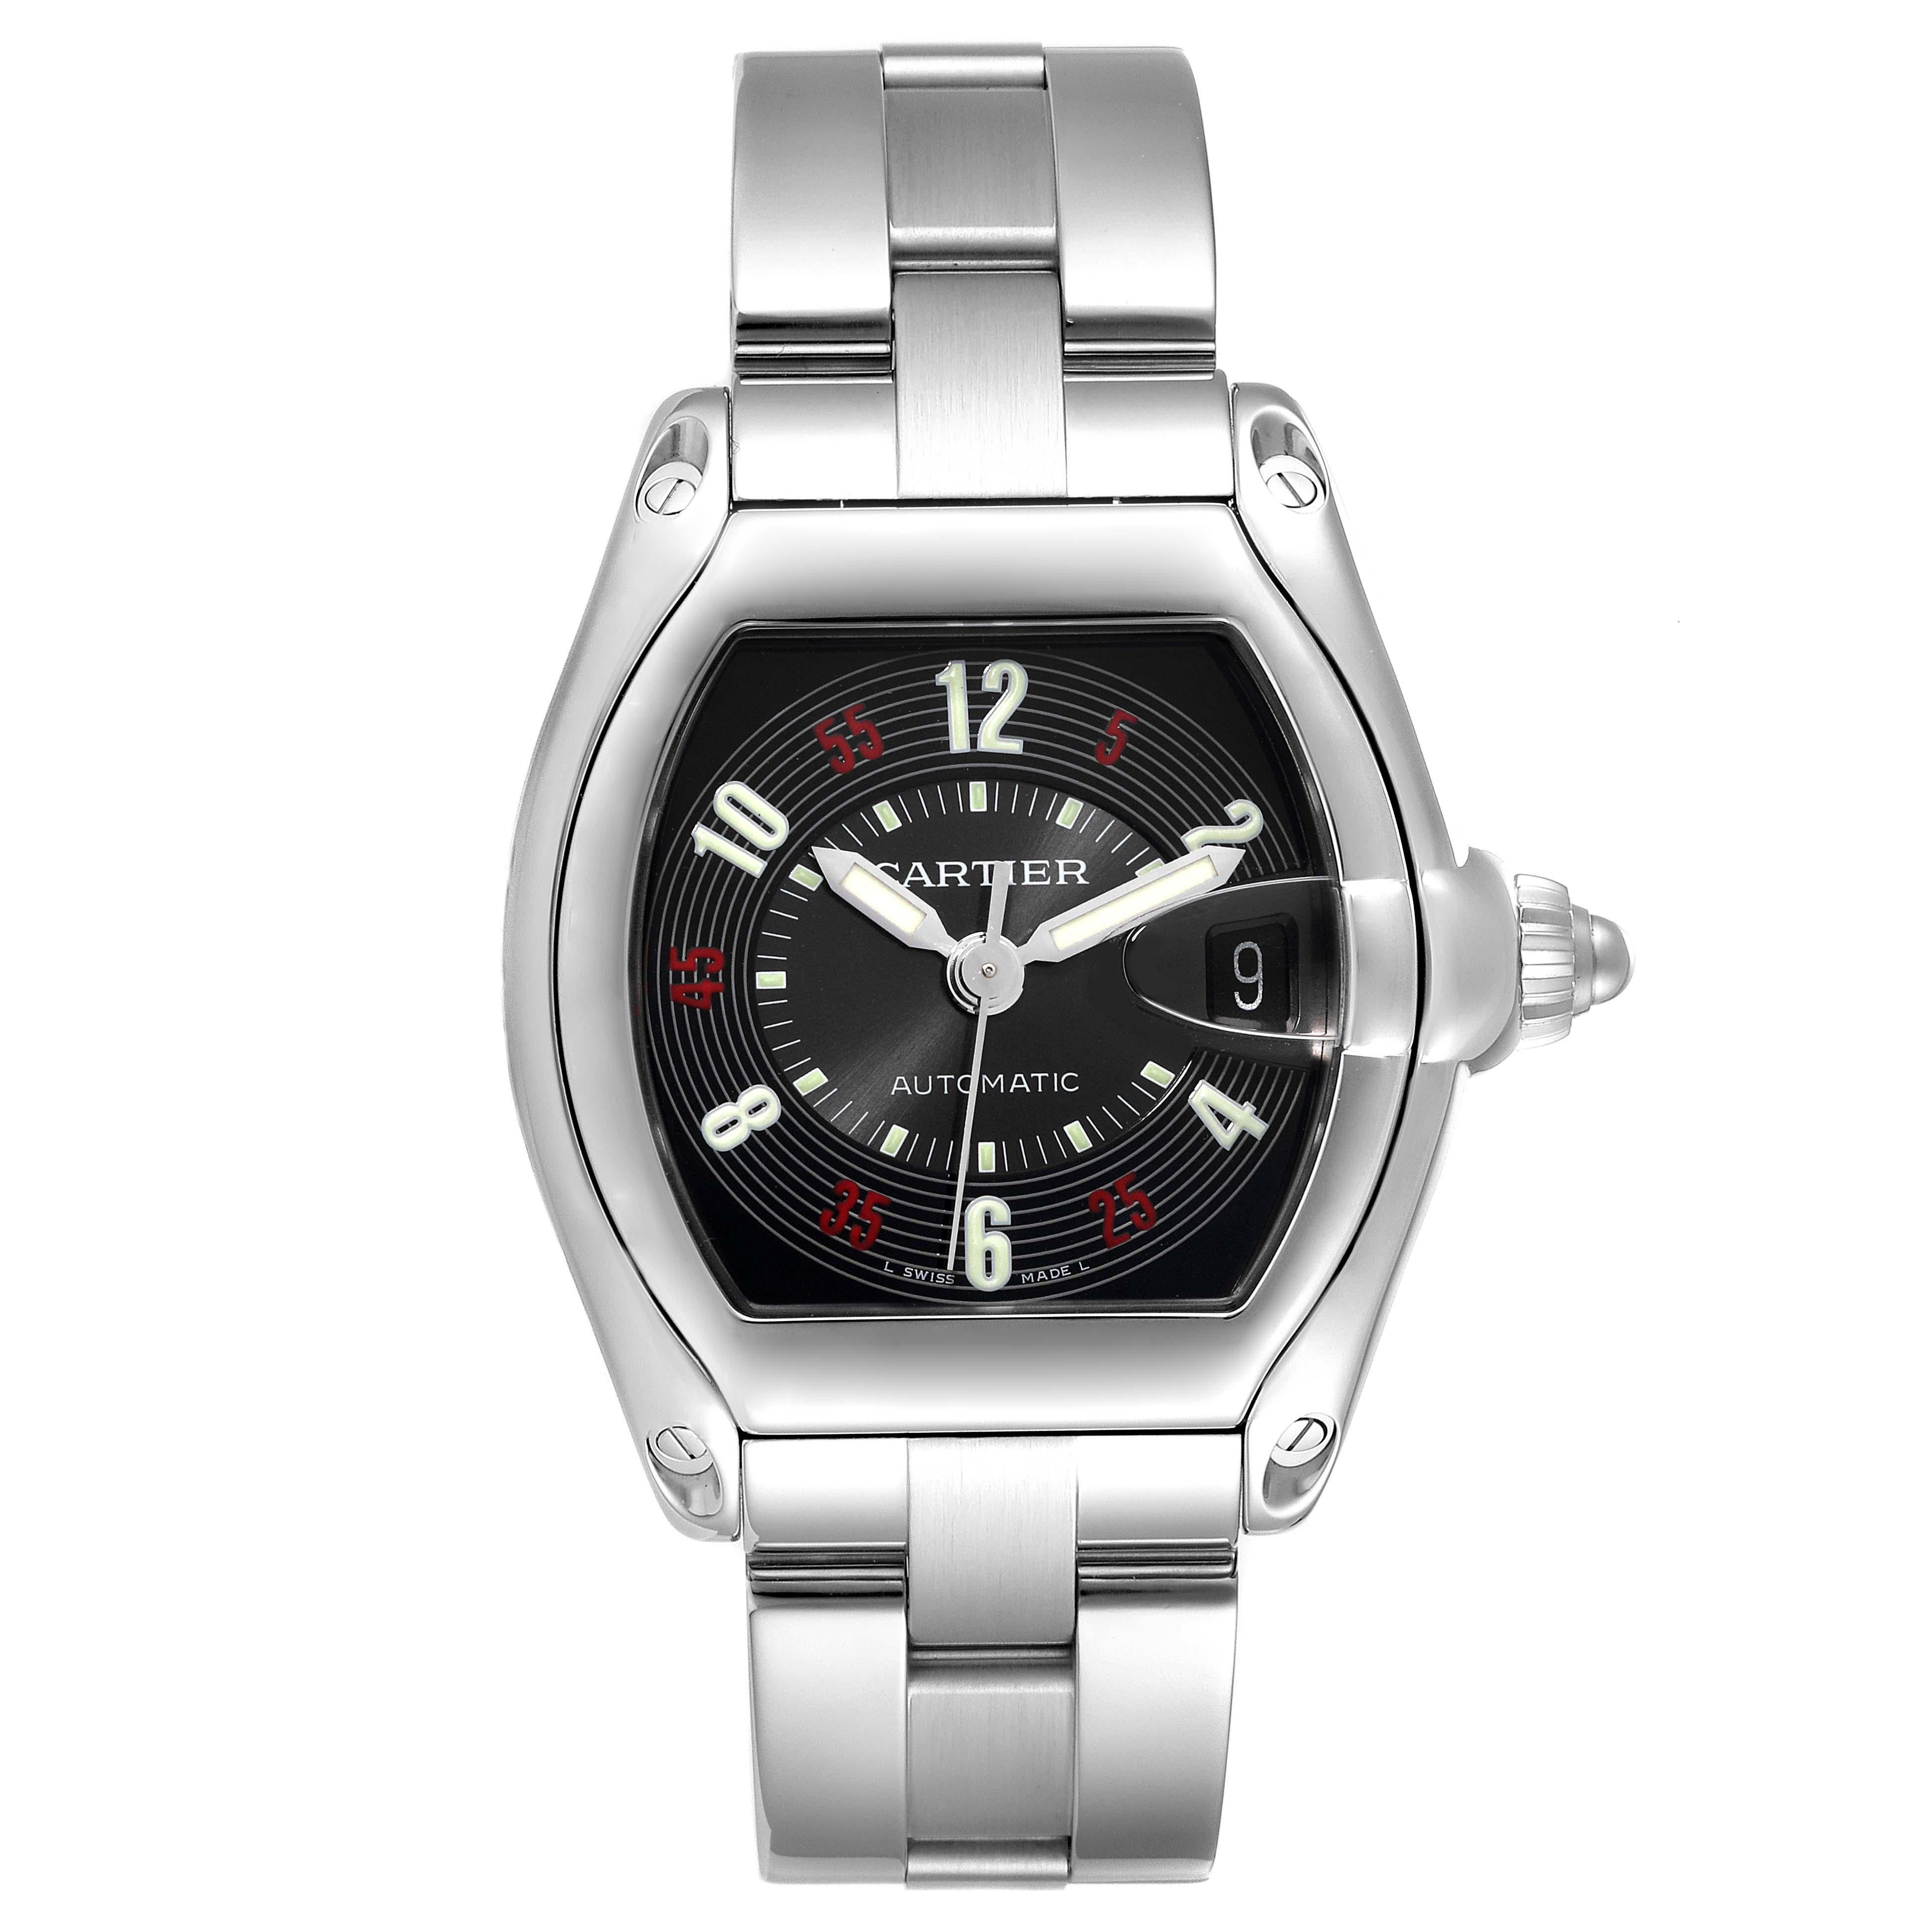 Cartier Roadster Vegas Roulette Red Green Steel Mens Watch W62002V3. Automatic self-winding movement. Stainless steel tonneau shaped case 38 x 43 mm. . Scratch resistant sapphire crystal with cyclops magnifier. Black Las Vegas Roulette dial with red